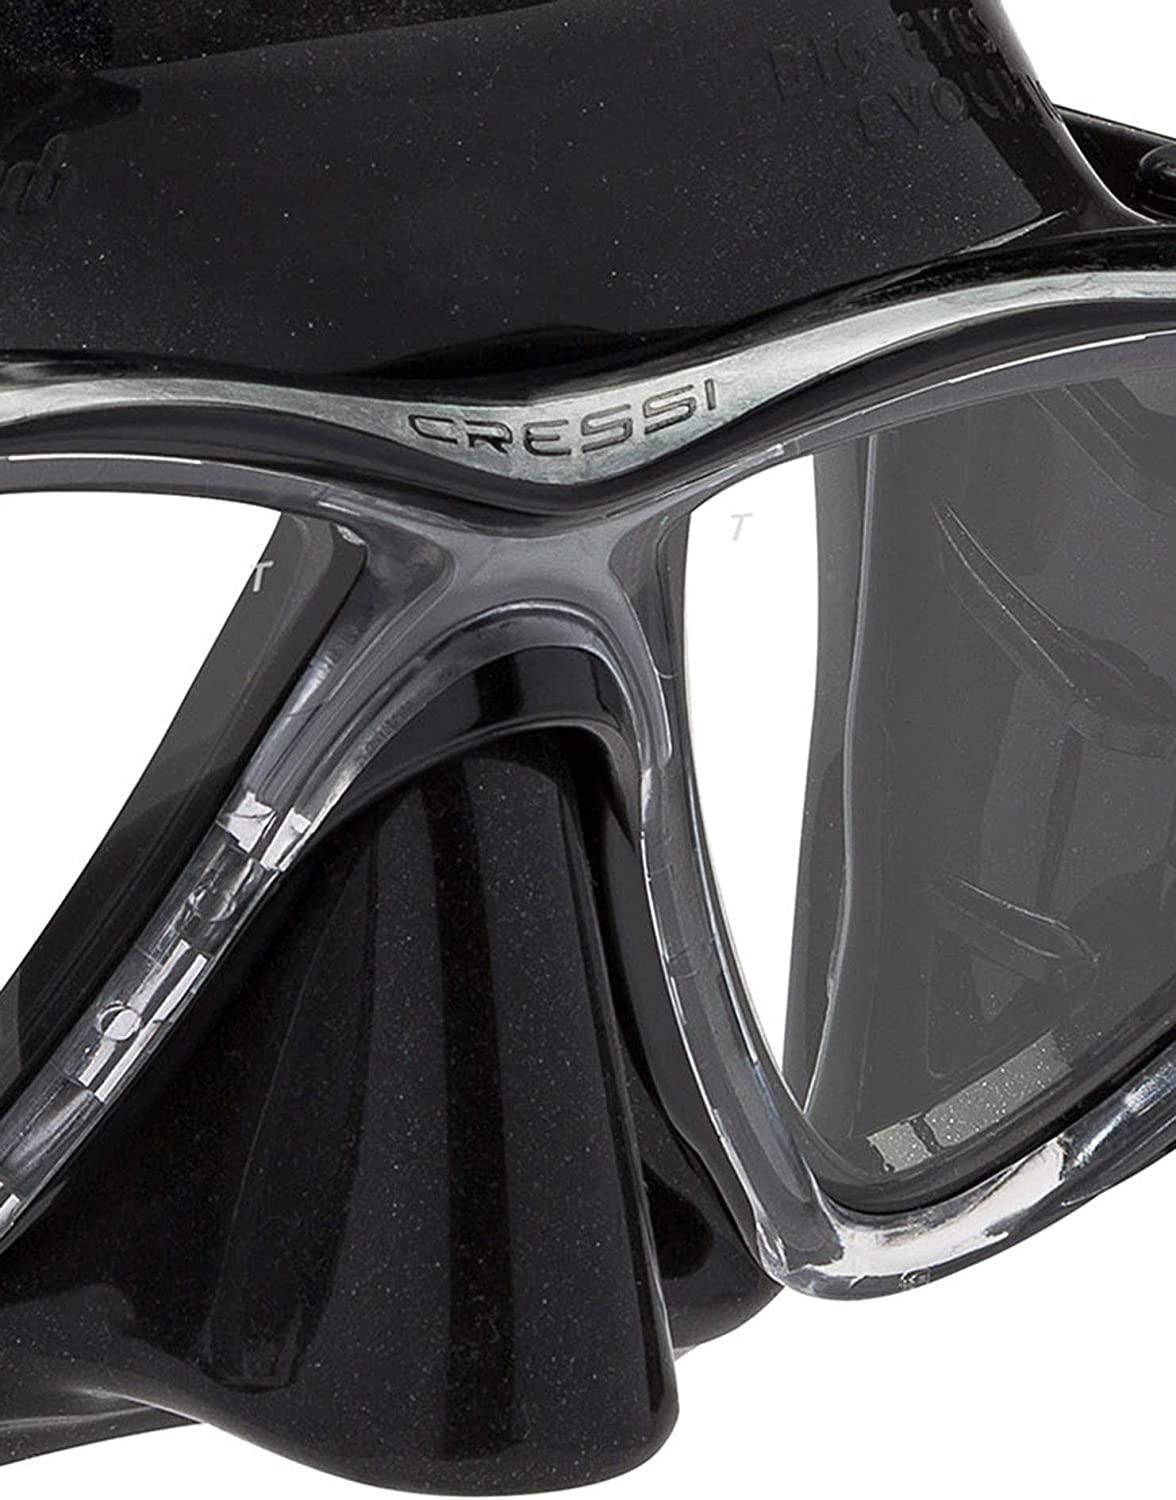 Cressi Air Scuba and Snorkeling Mask